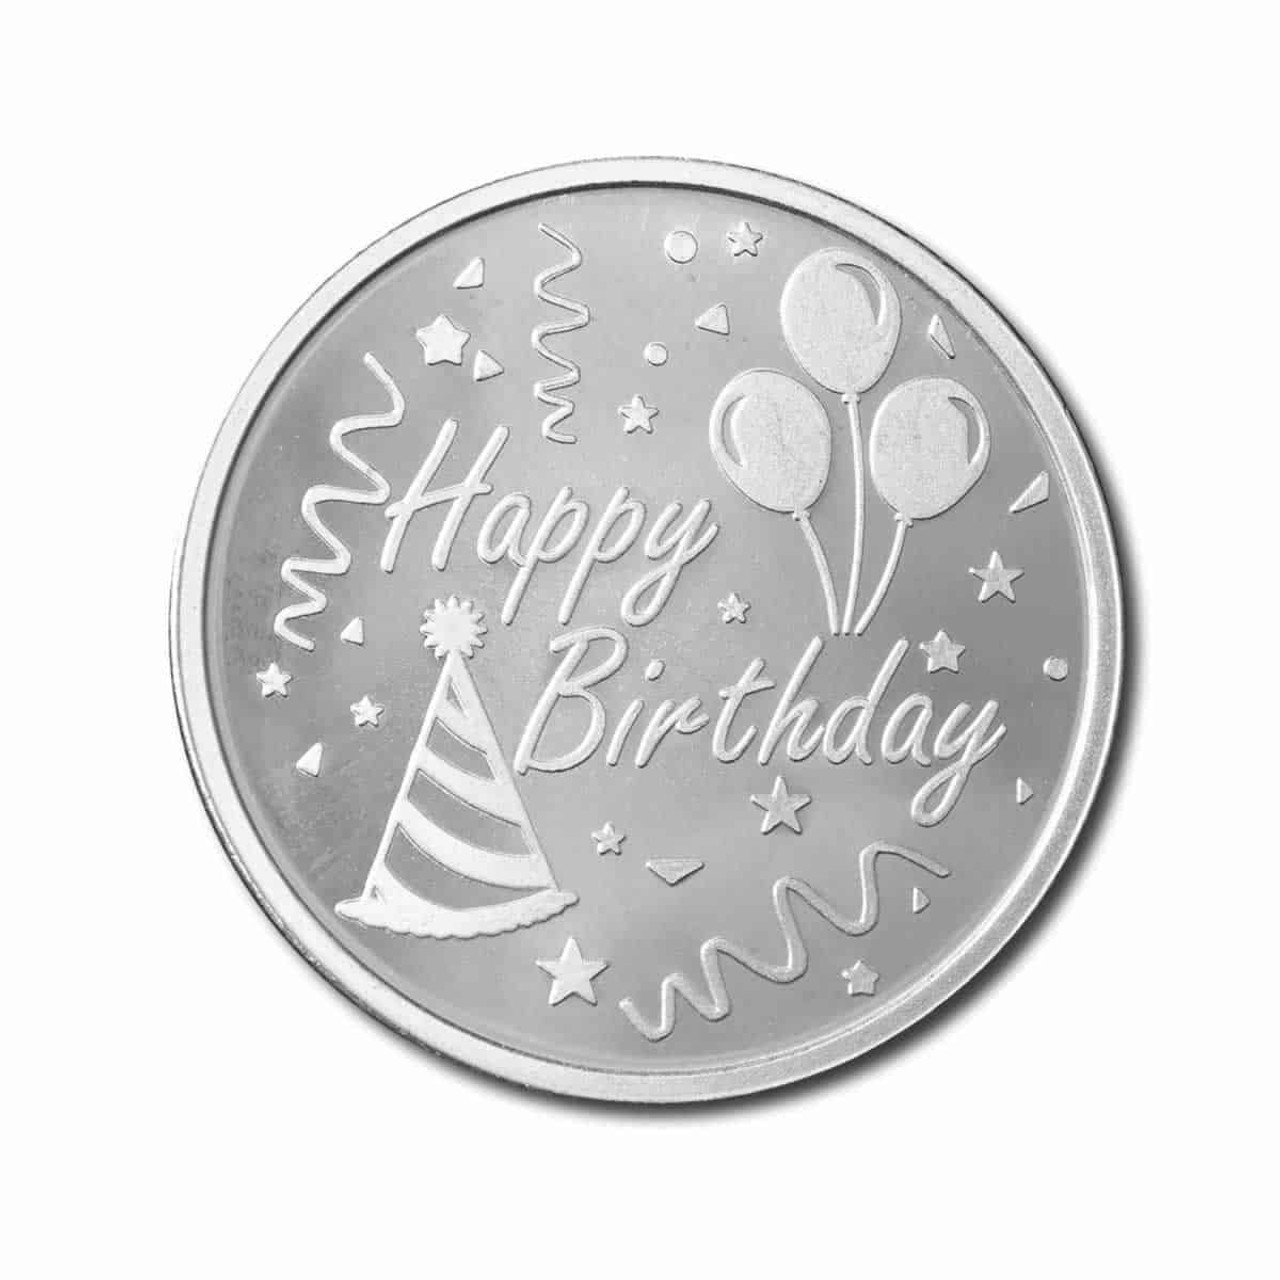 Happy Birthday in silver ink with gold stars printed on 5/8 white